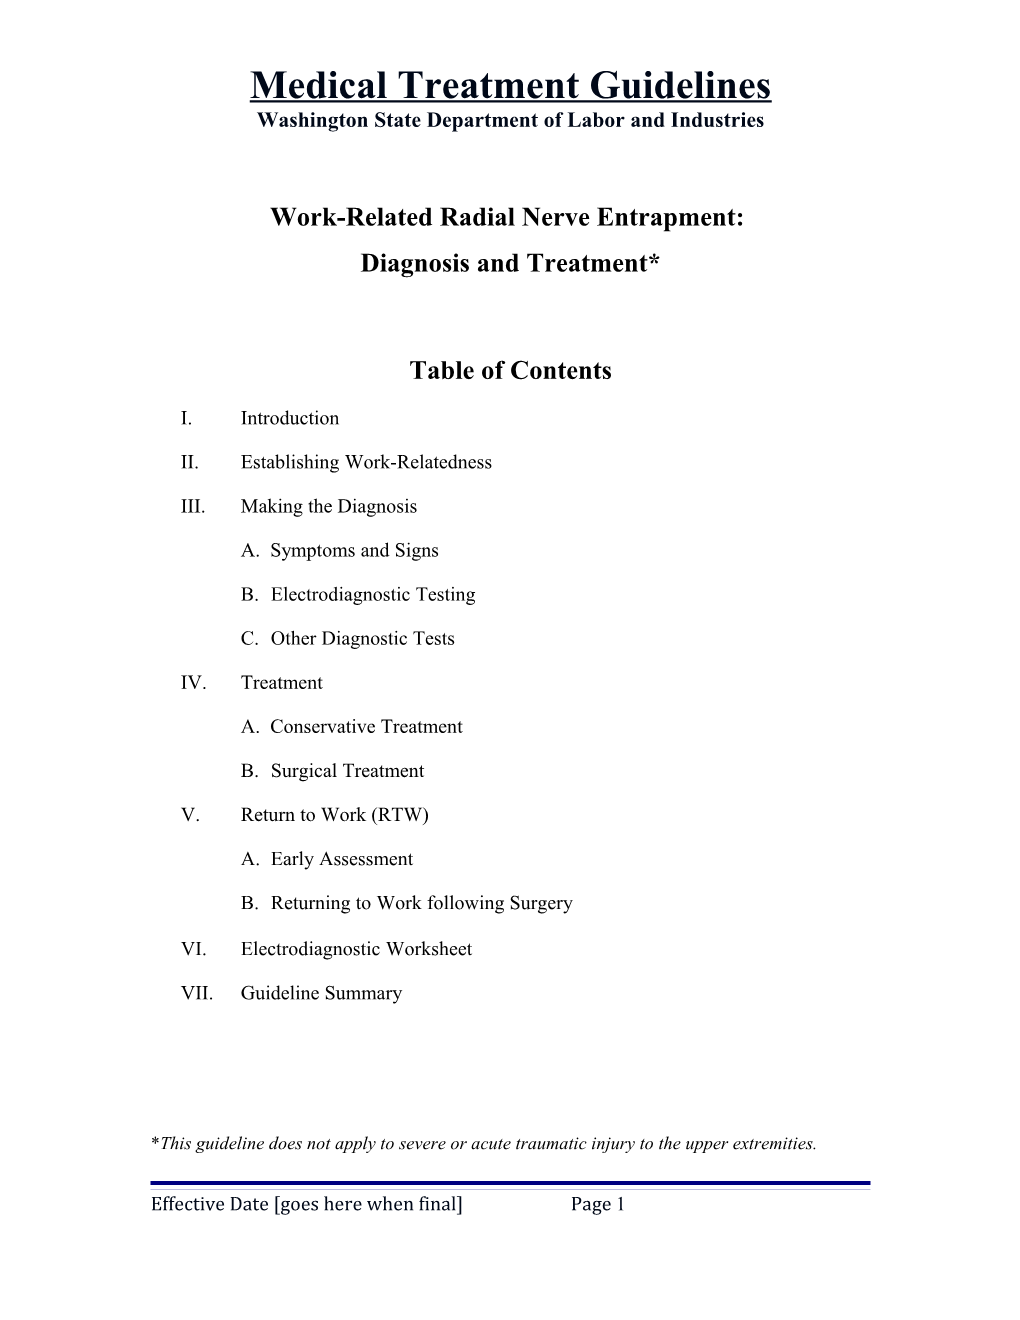 Work-Related Radial Nerve Entrapment: Diagnosis and Treatment